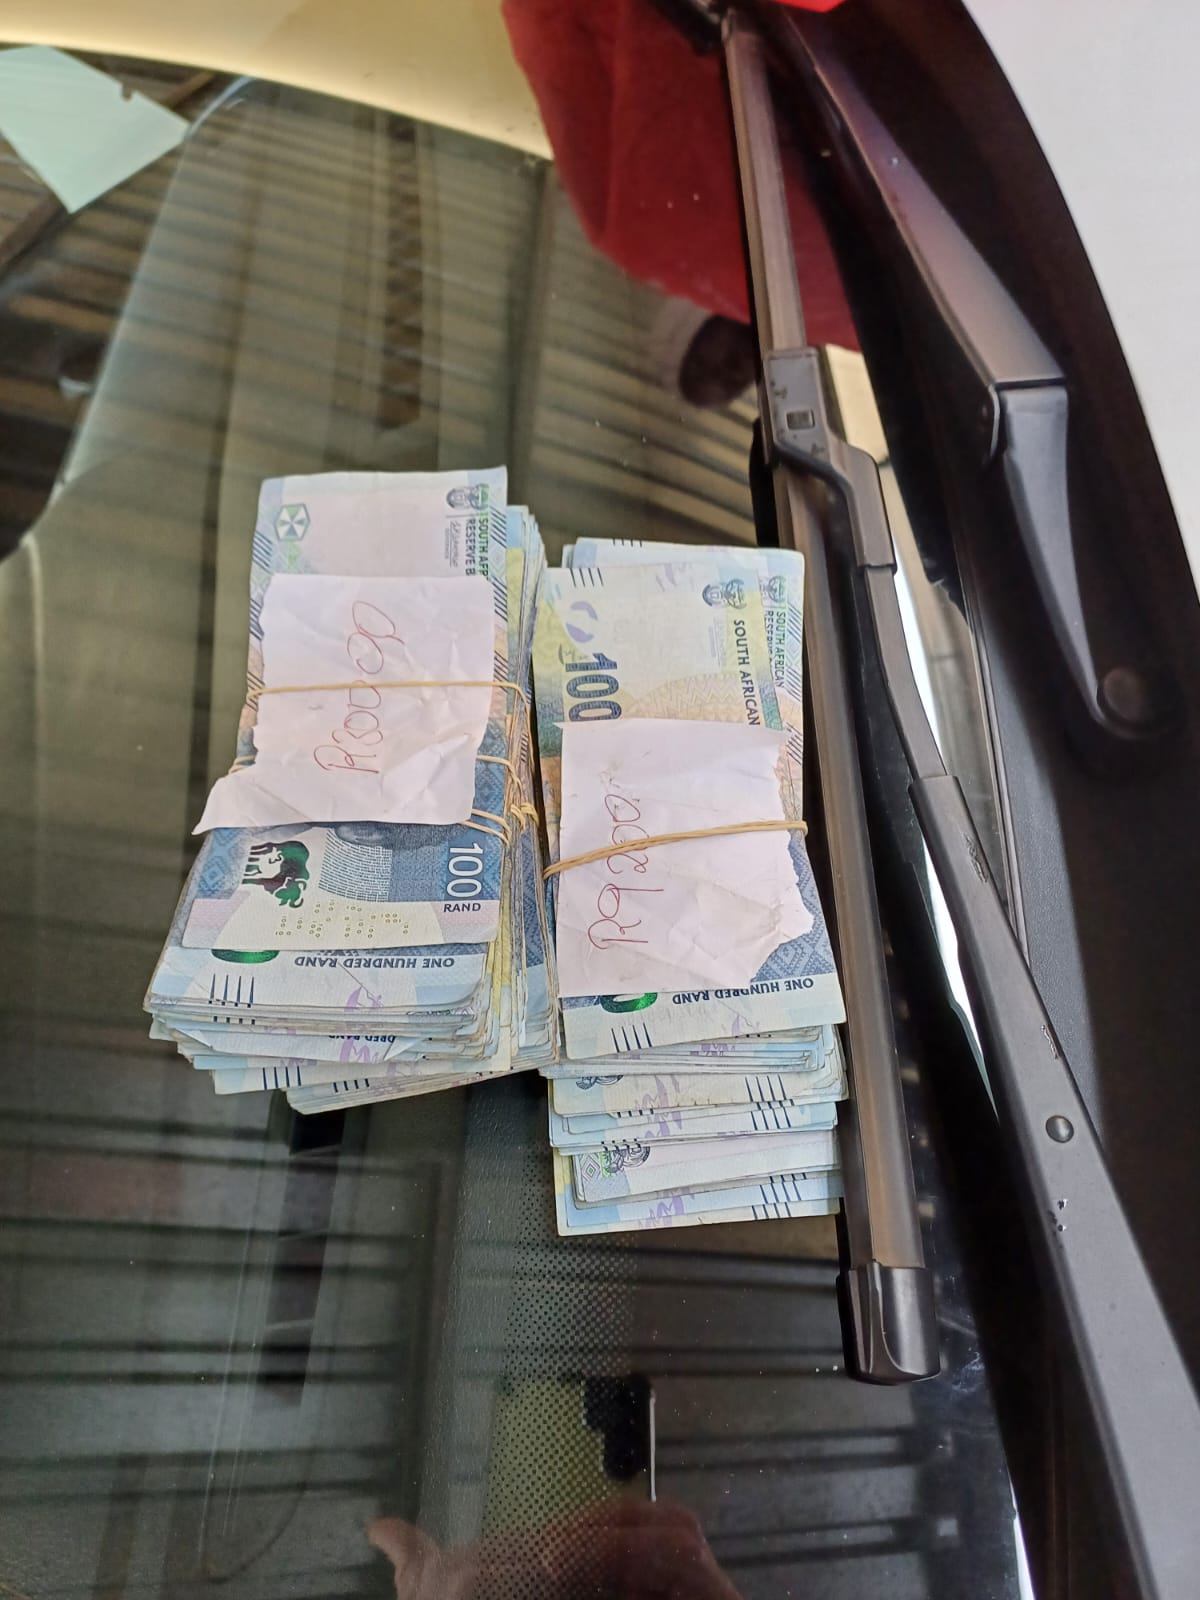 Suspect arrested and vehicle seized with a large amount of cash at Pilgrims Rest